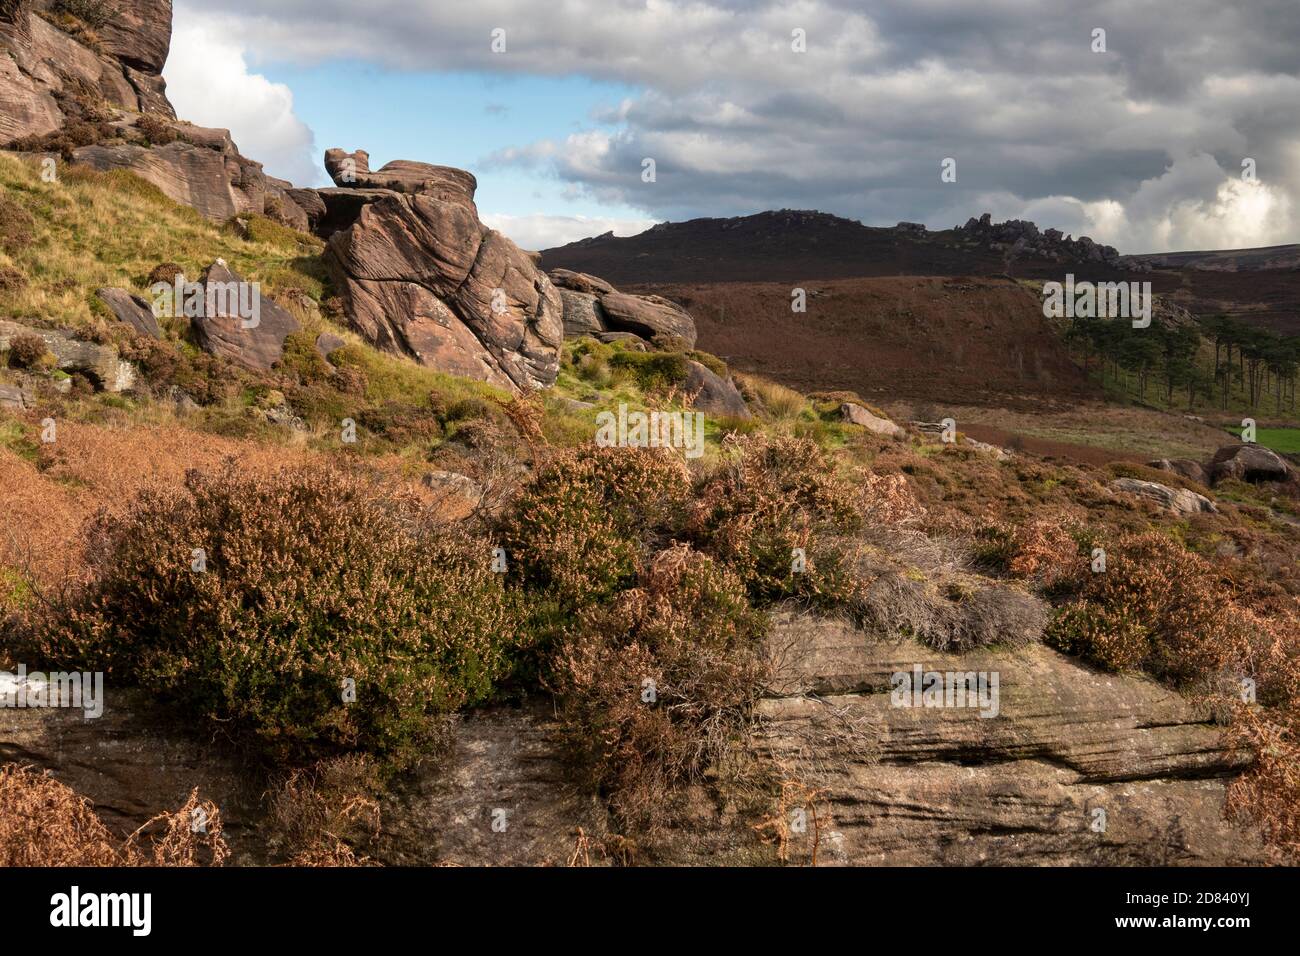 UK, England, Staffordshire, Moorlands, The Roaches, heather growing on rocky outcrop near Ramshaw Rocks Stock Photo